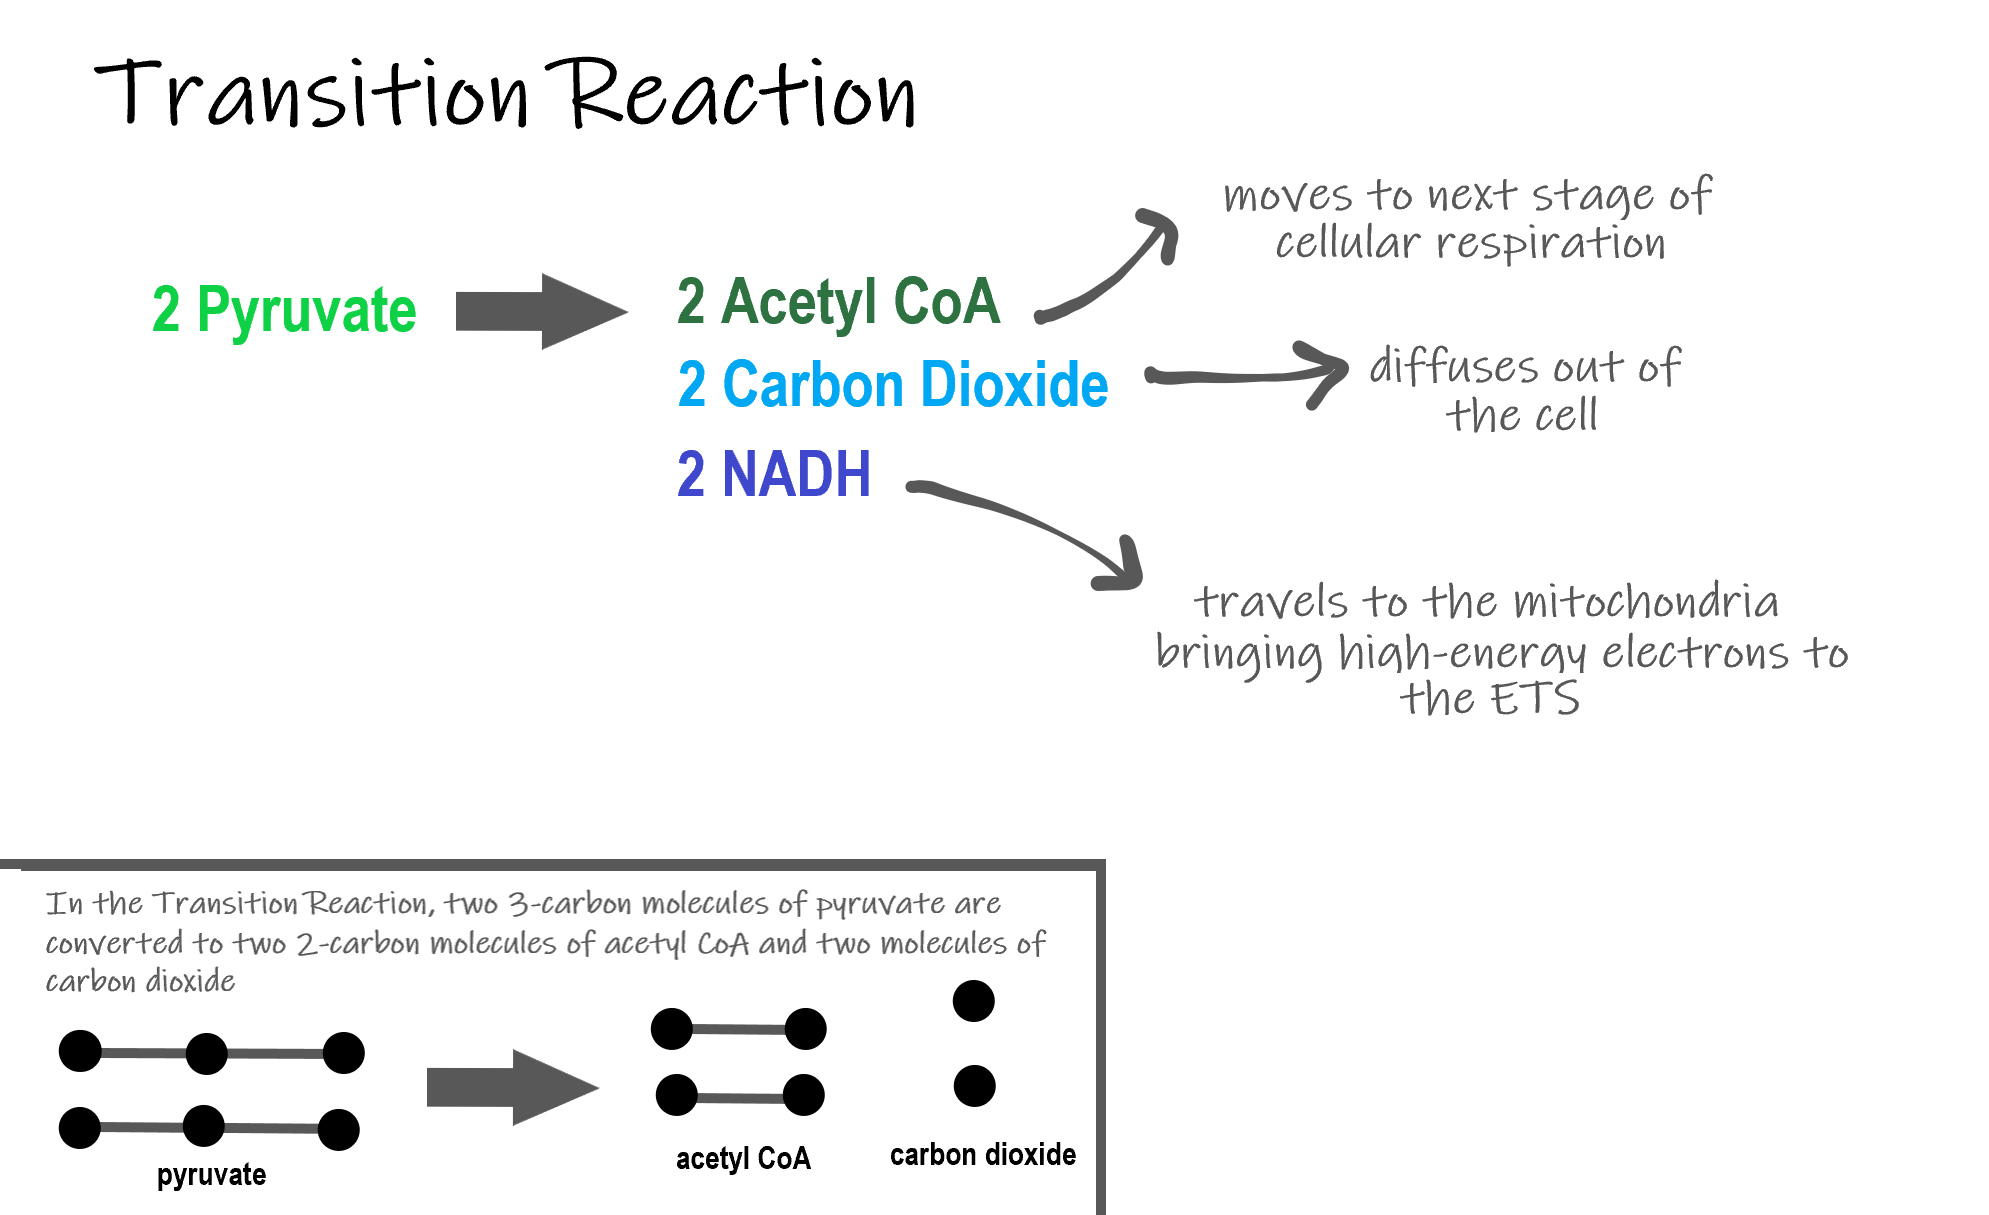 Image shows a diagram of the transition reaction. In this reaction, 2 Pyruvate are converted to two acteyl CoA and 2 Carbon dioxide. In this process, 2 NADH are sent to the ETS carrying high energy electrons. The carbon dioxide leave the cell as metabolic waste and the acetyl CoA enter the Krebs Cycle.